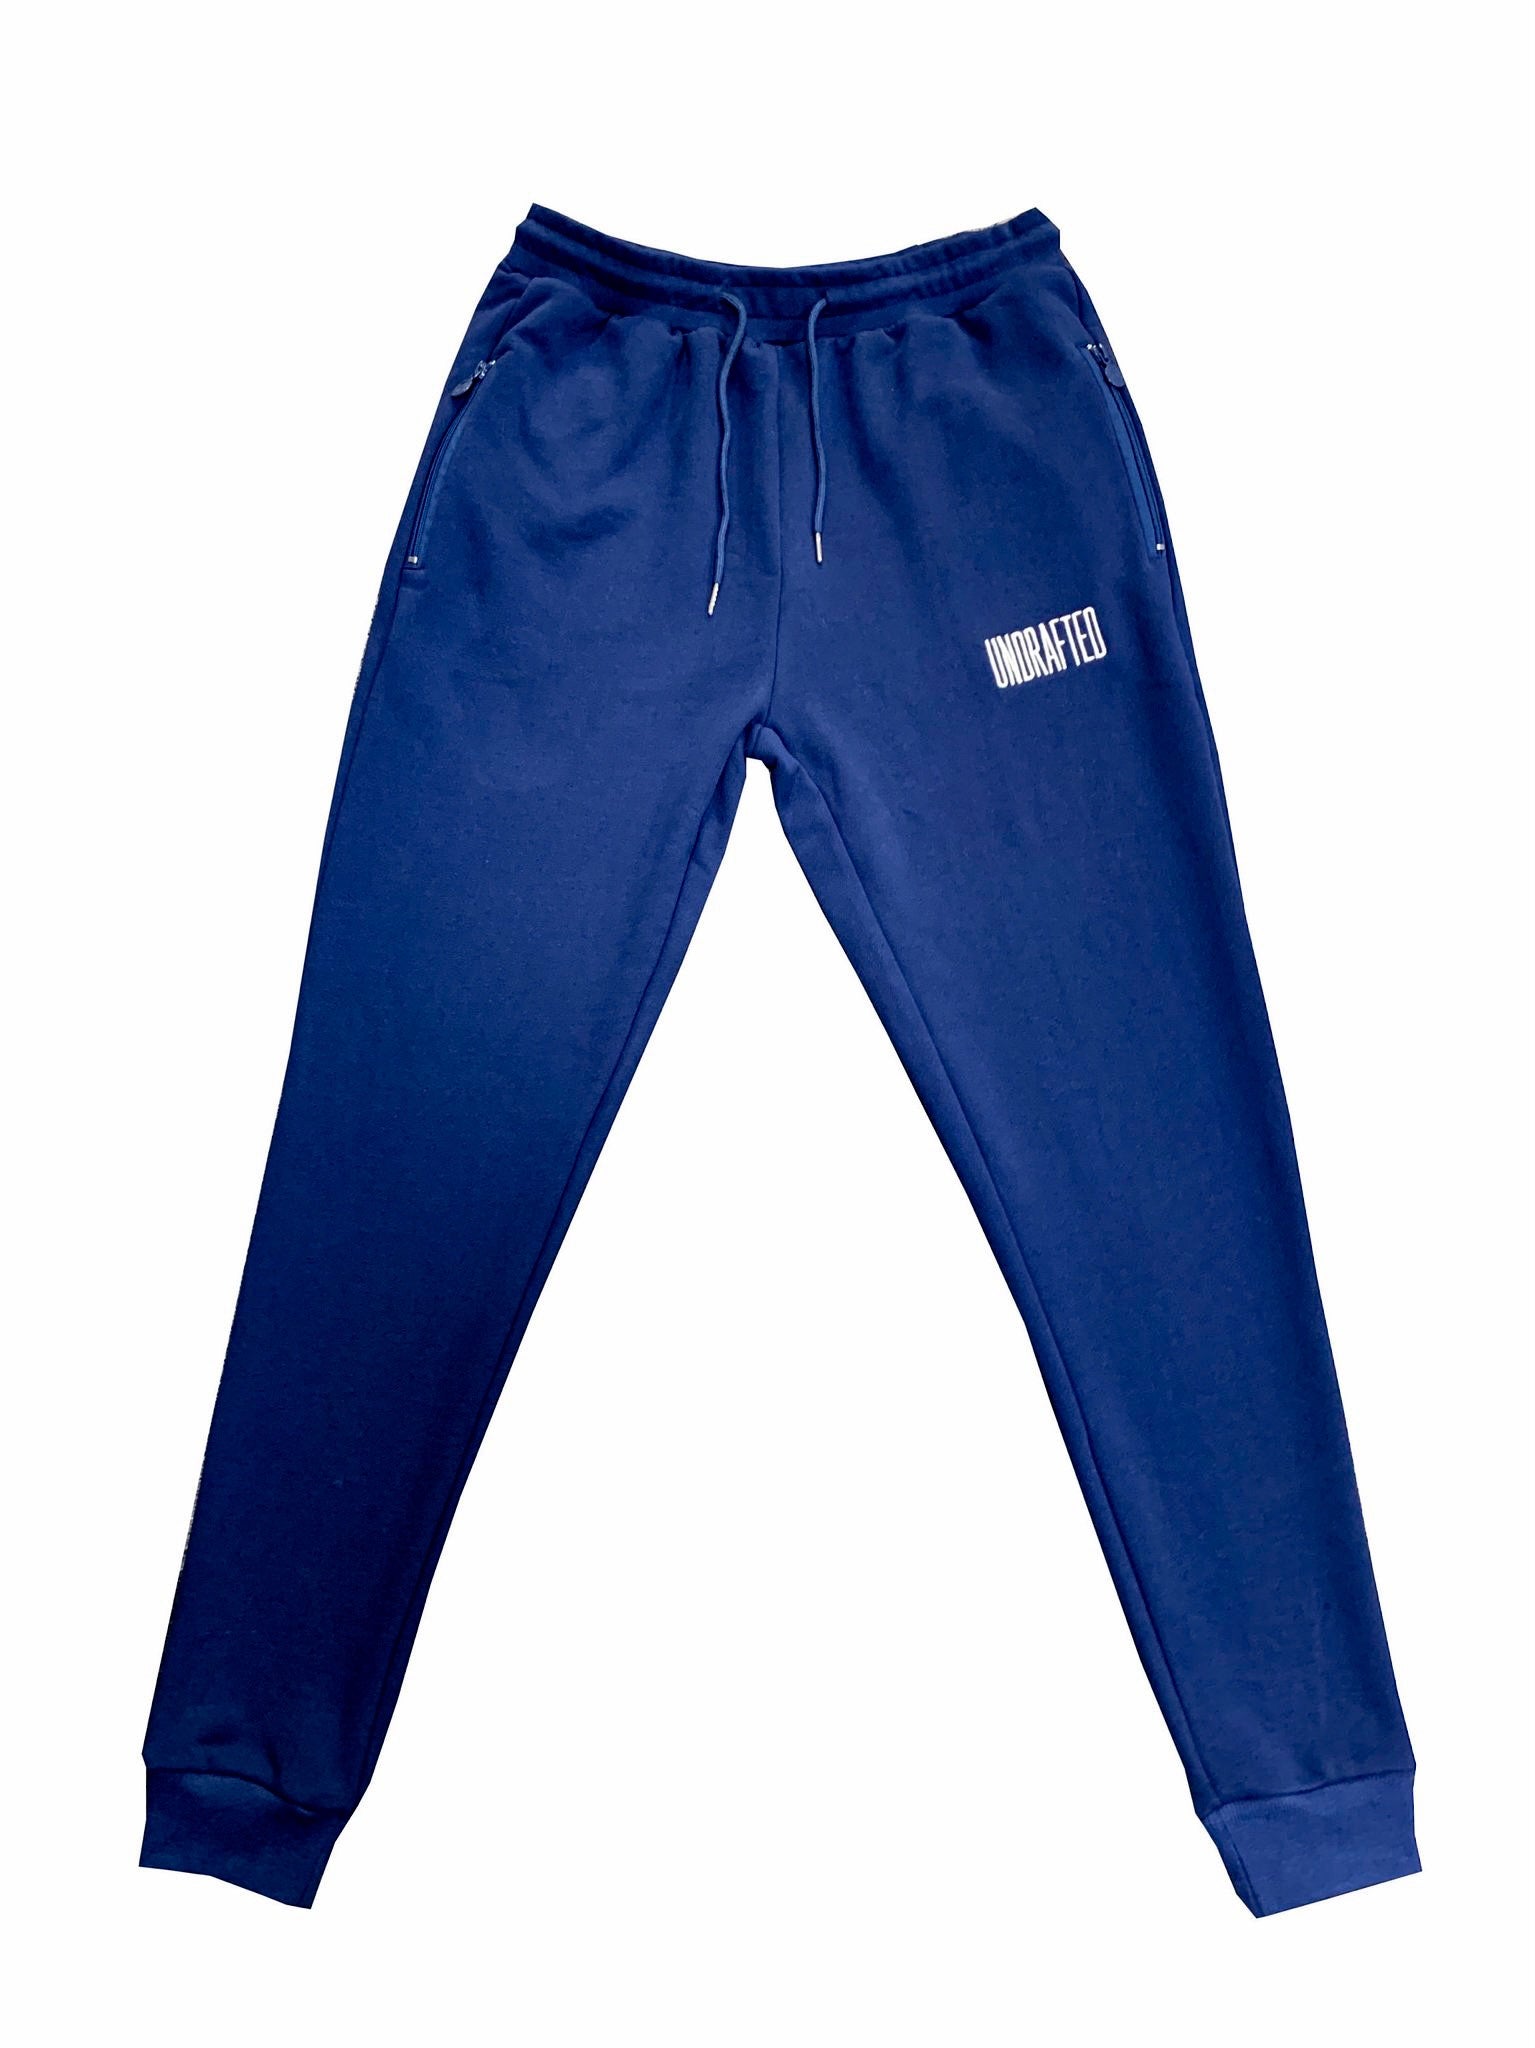 Undrafted Joggers - Navy Blue/White